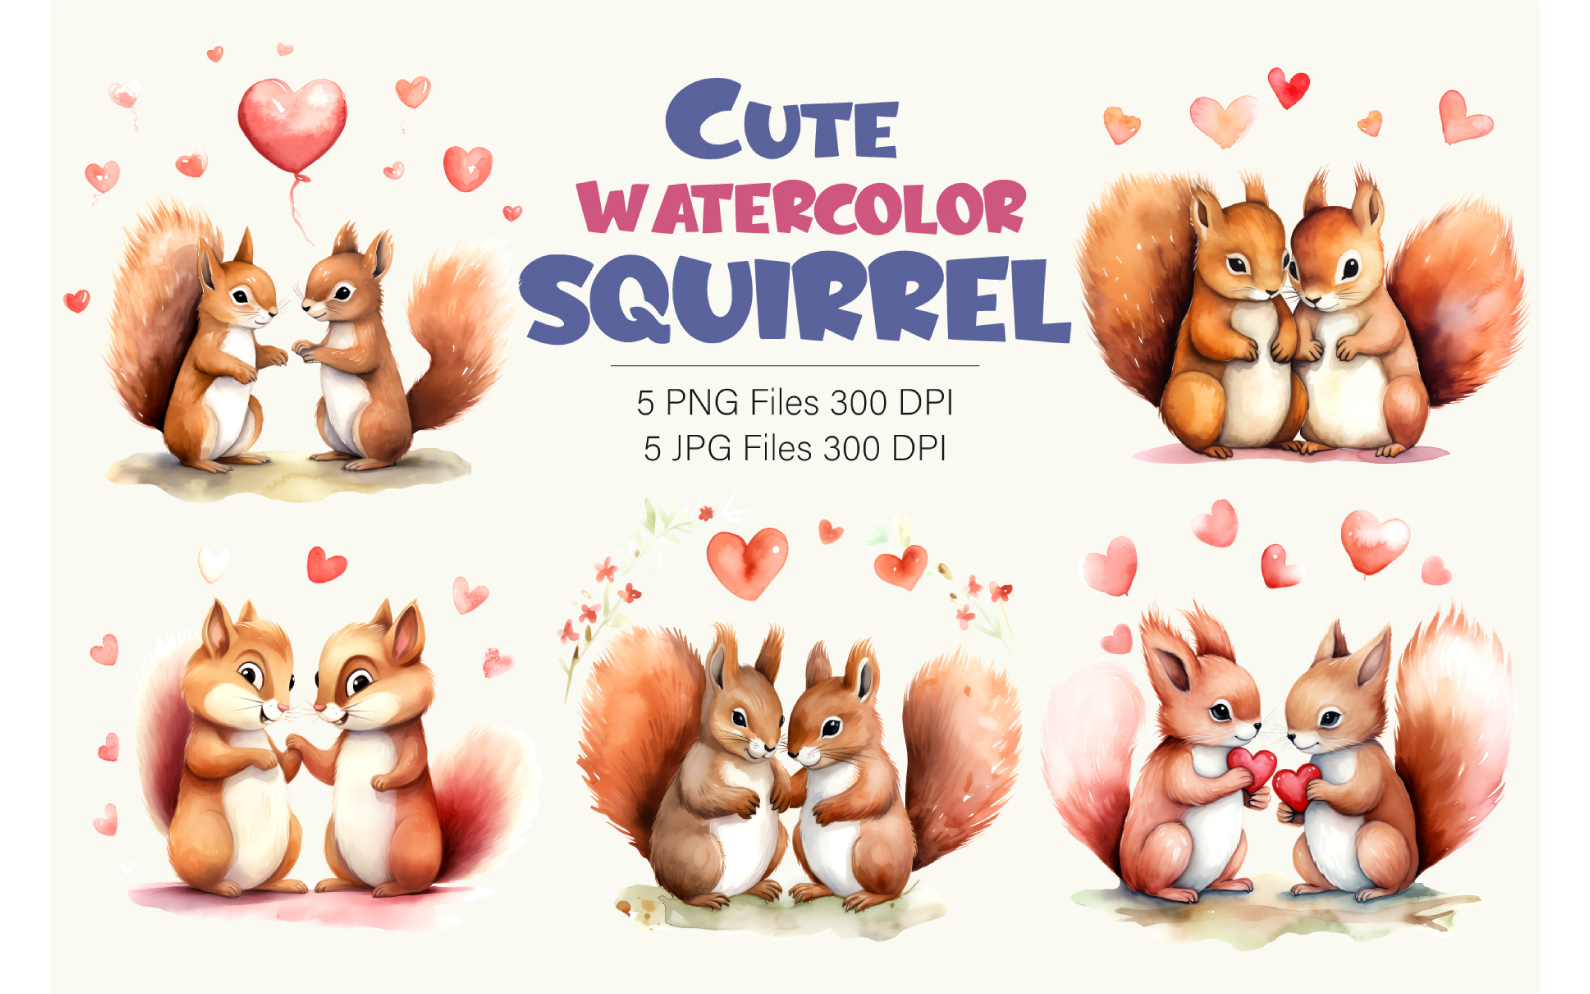 Cute Squirrels for Valentines Day. Watercolor.